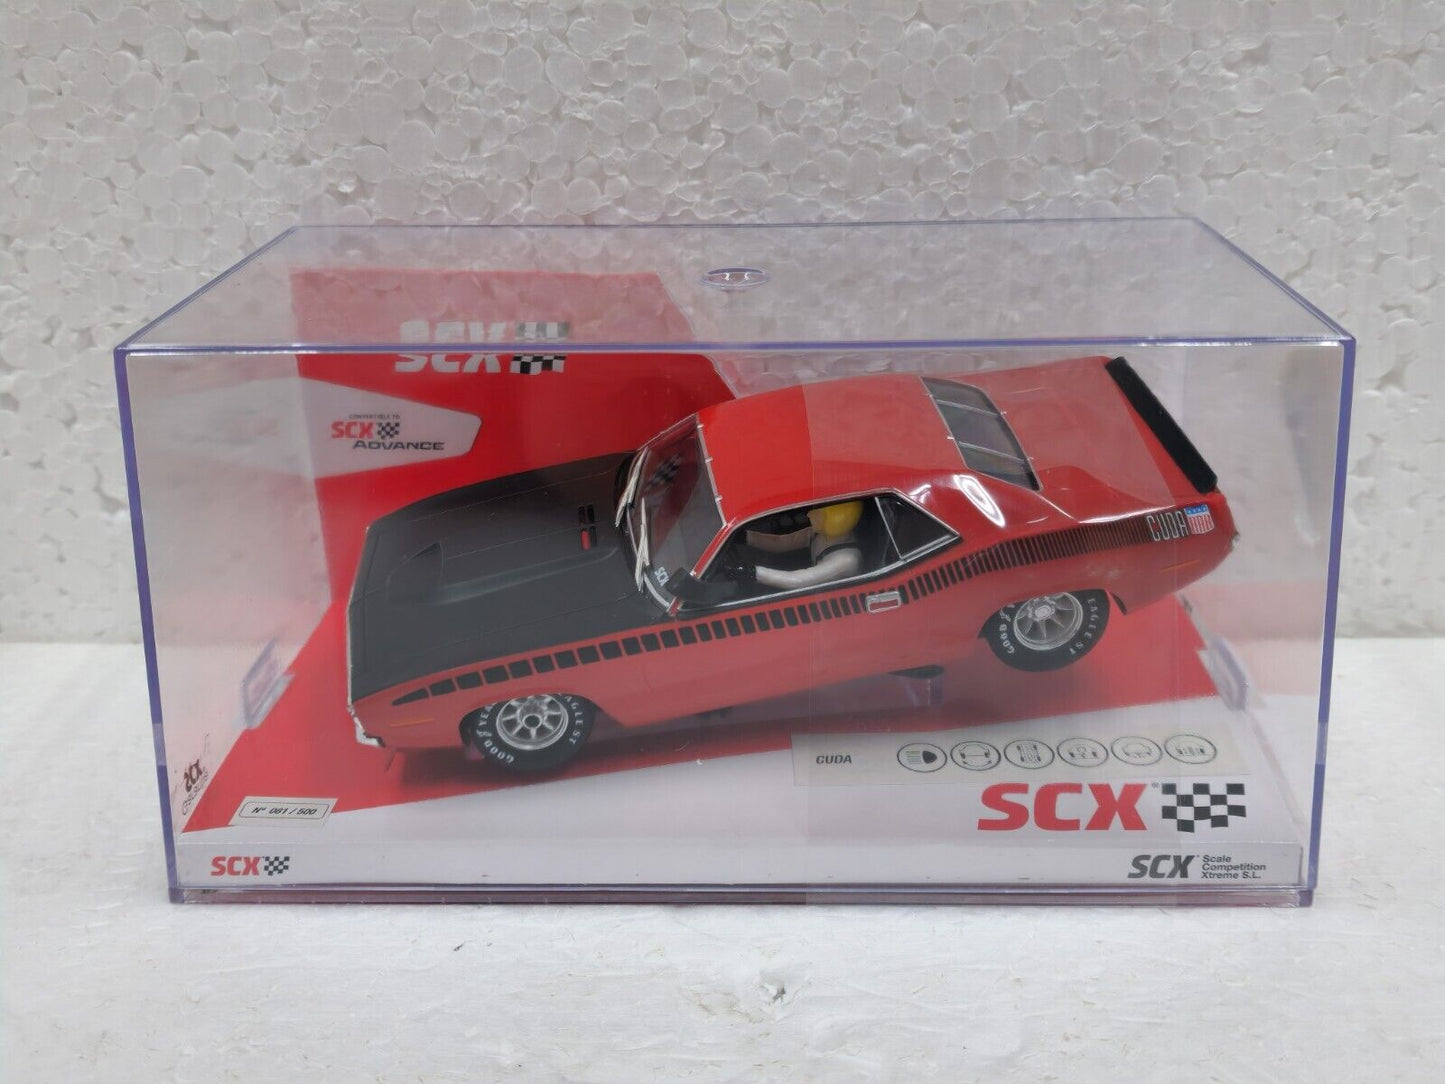 SCX Plymouth Cuda Trans Am Red 1970 Limited Edition for Scalextric Slot Car 1/32 - PowerHobby